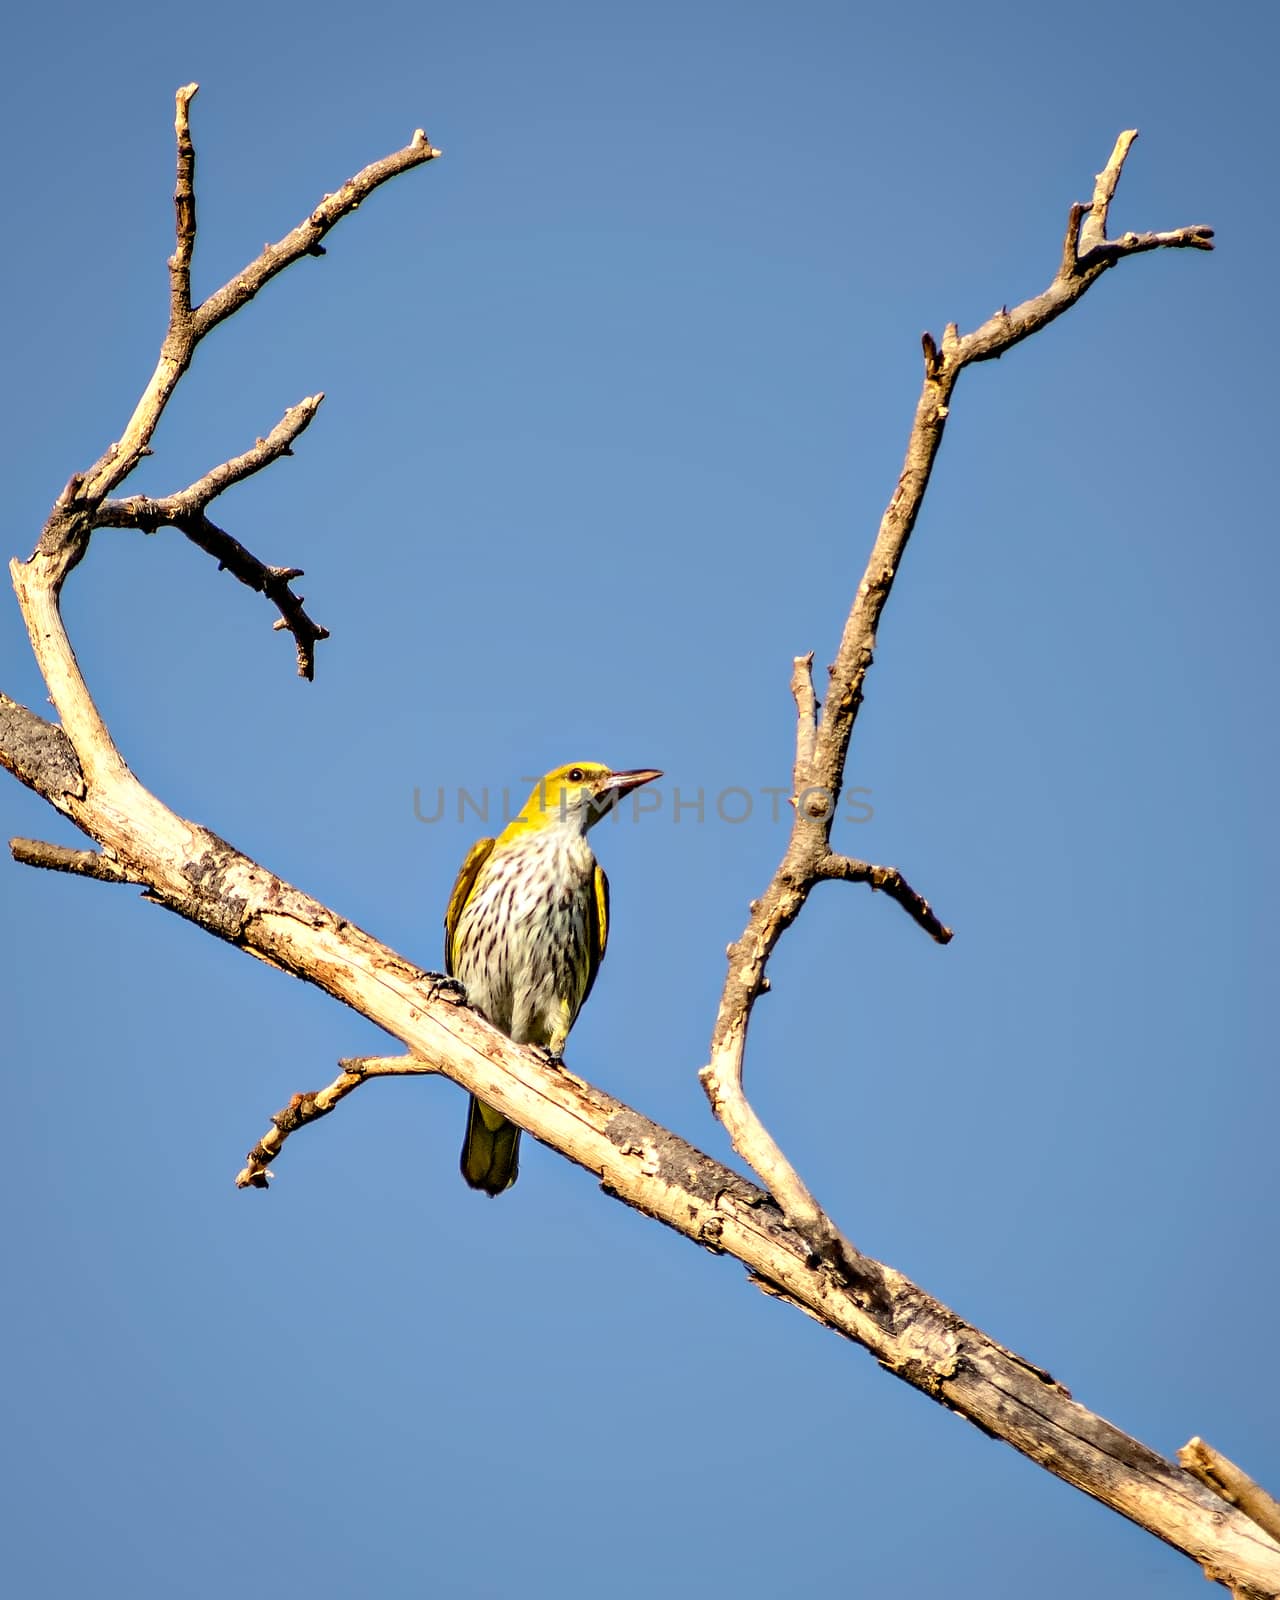 Female Indian Golden Oriole (Oriolus kundoo) bird sitting on a dry tree branch with clear blue sky background.